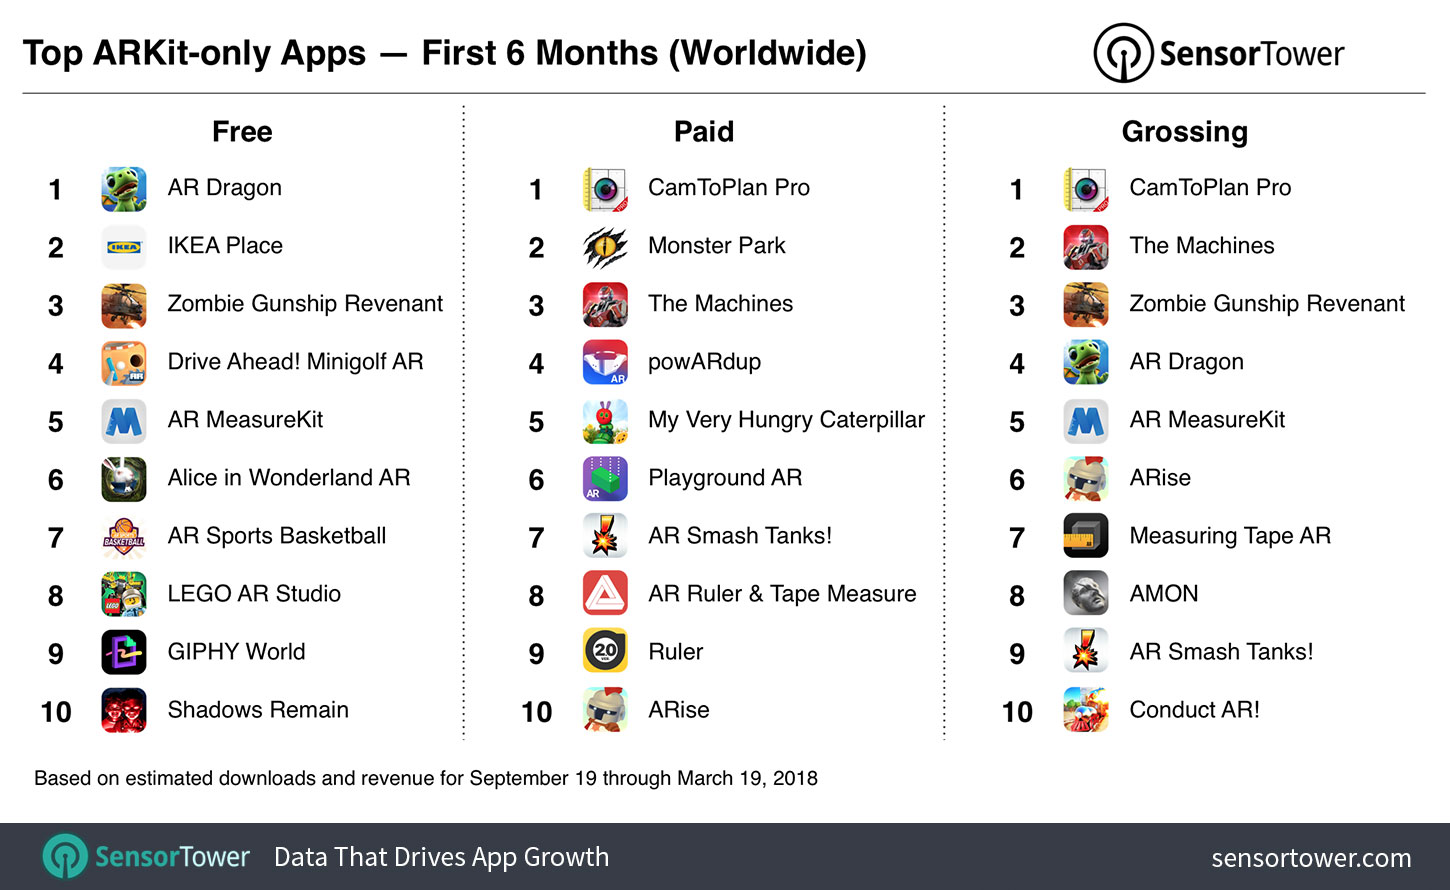 Ranking of top free, paid, and grossing ARKit apps overall for September 19, 2017 to March 19, 2018